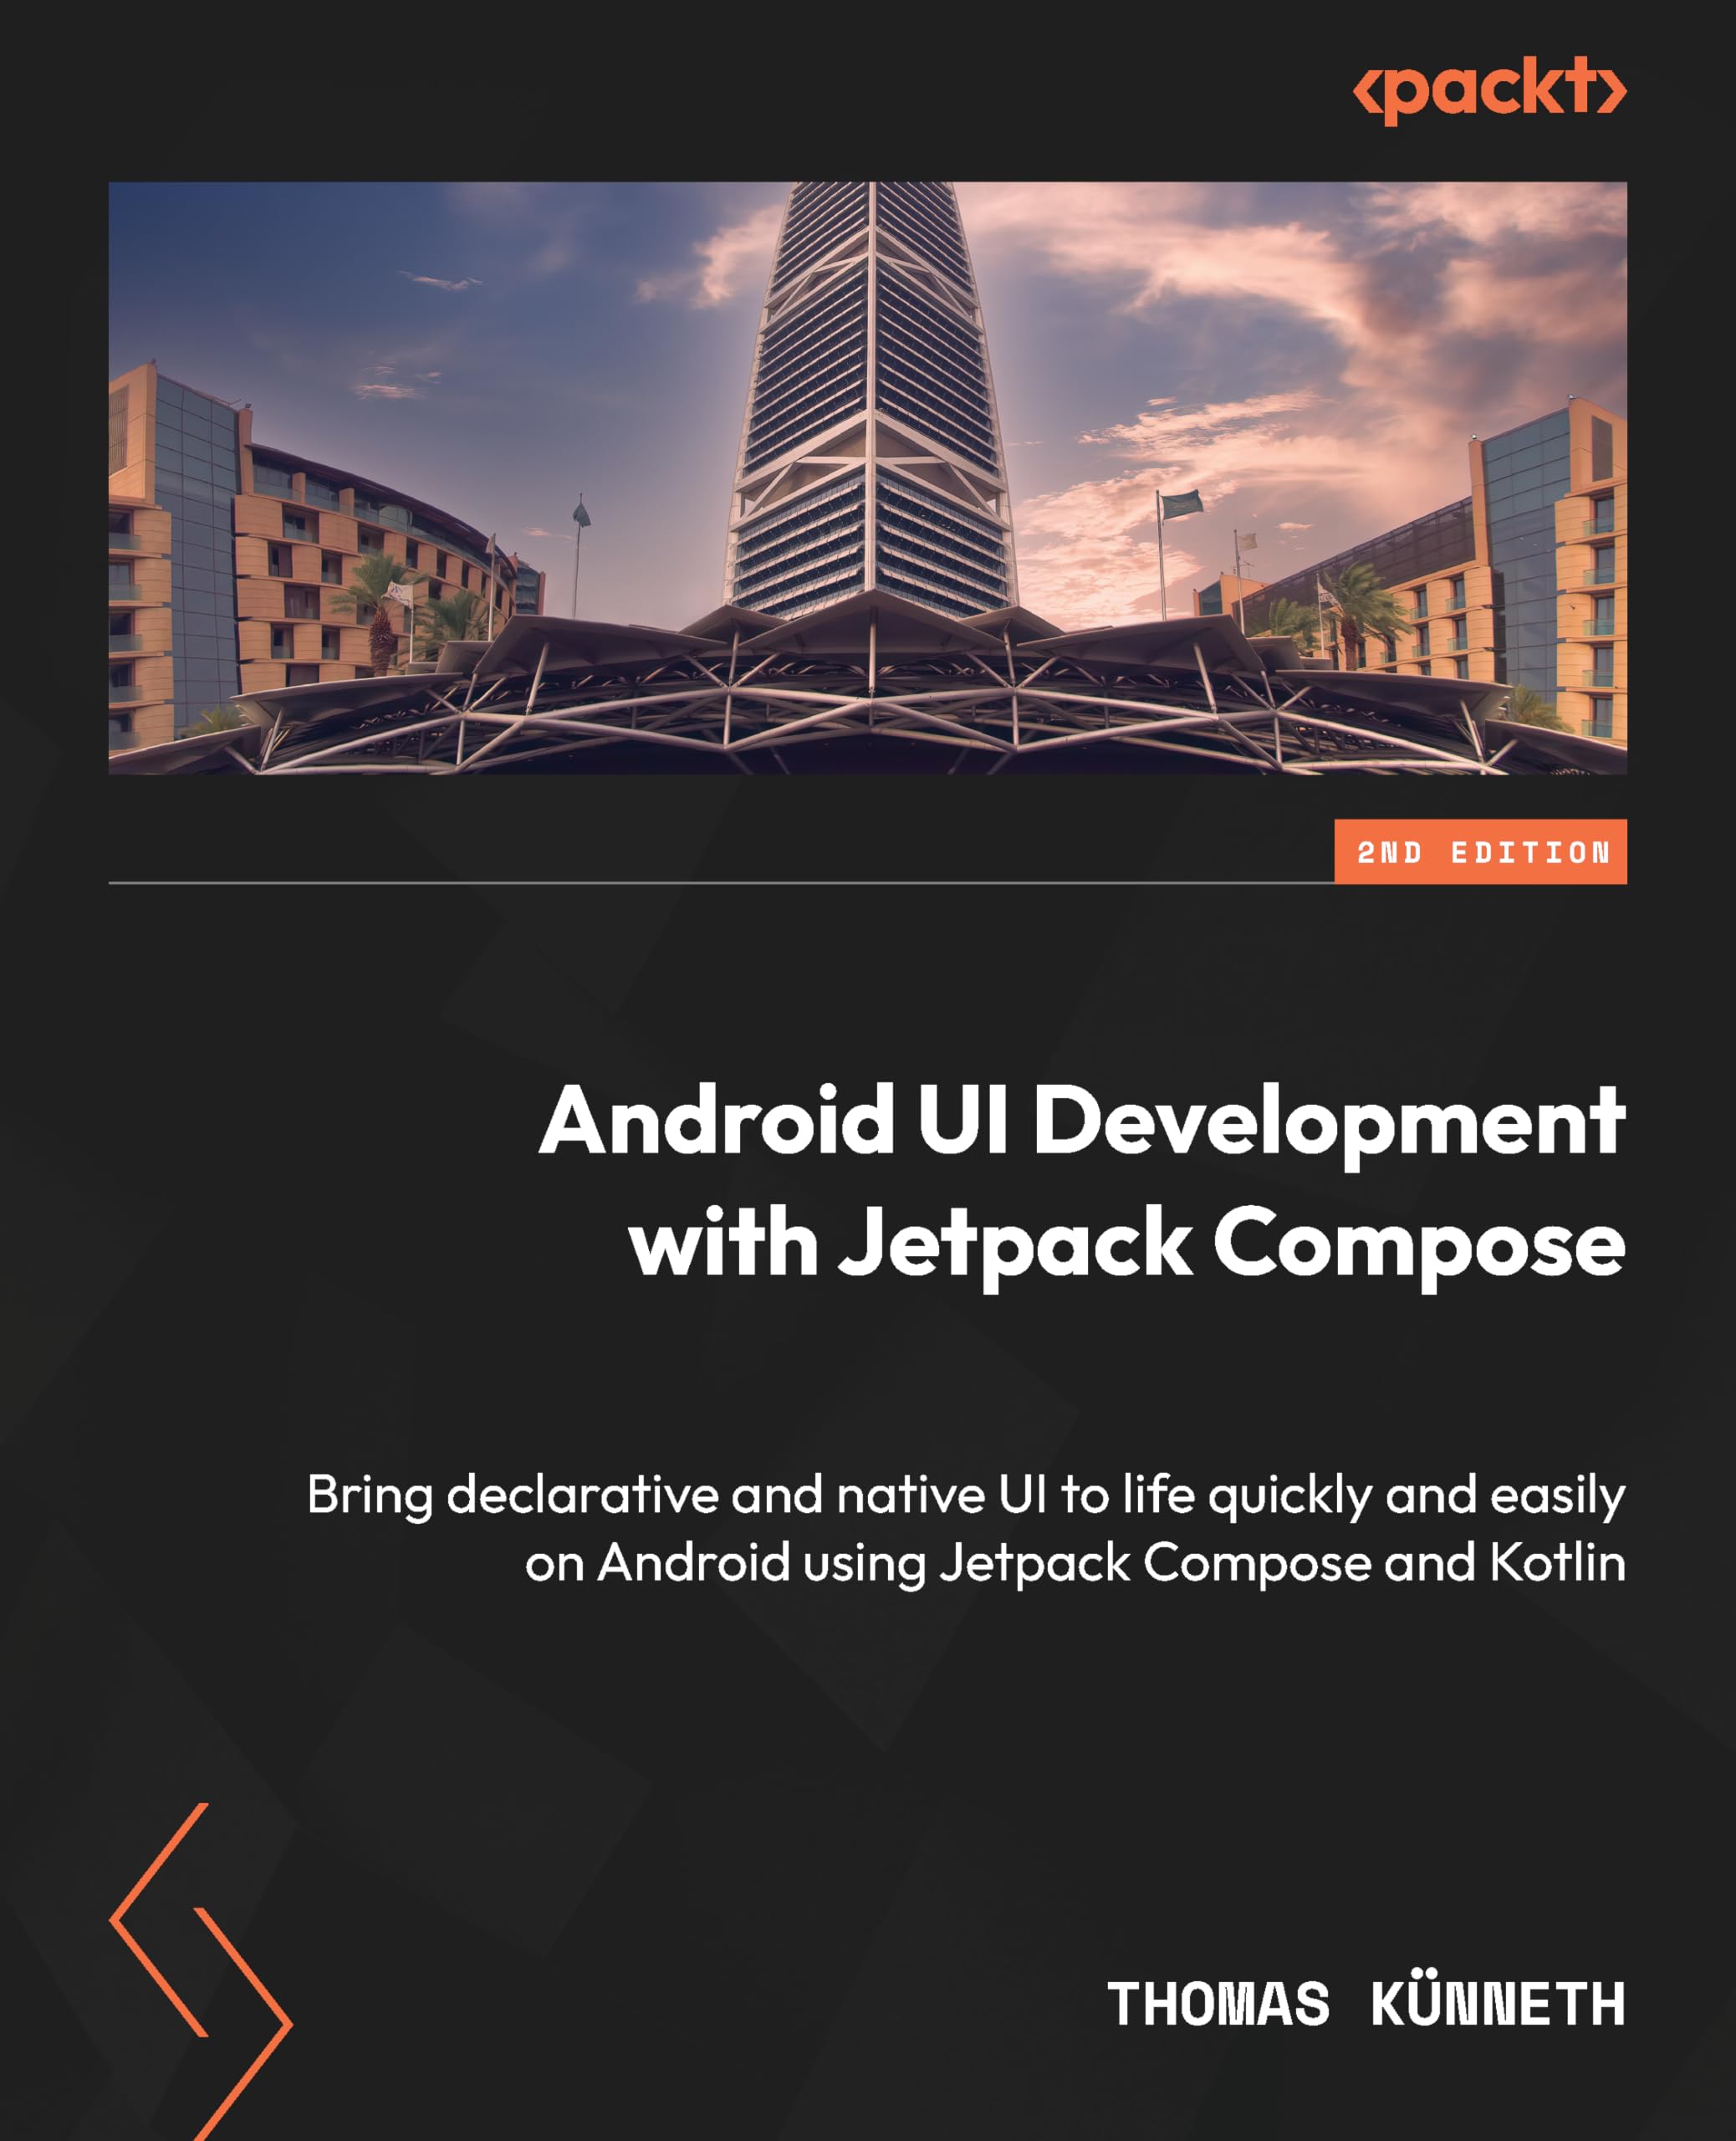 Android UI Development with Jetpack Compose: Bring declarative and native UI to life quickly and easily on Android using Jetpack Compose and Kotlin